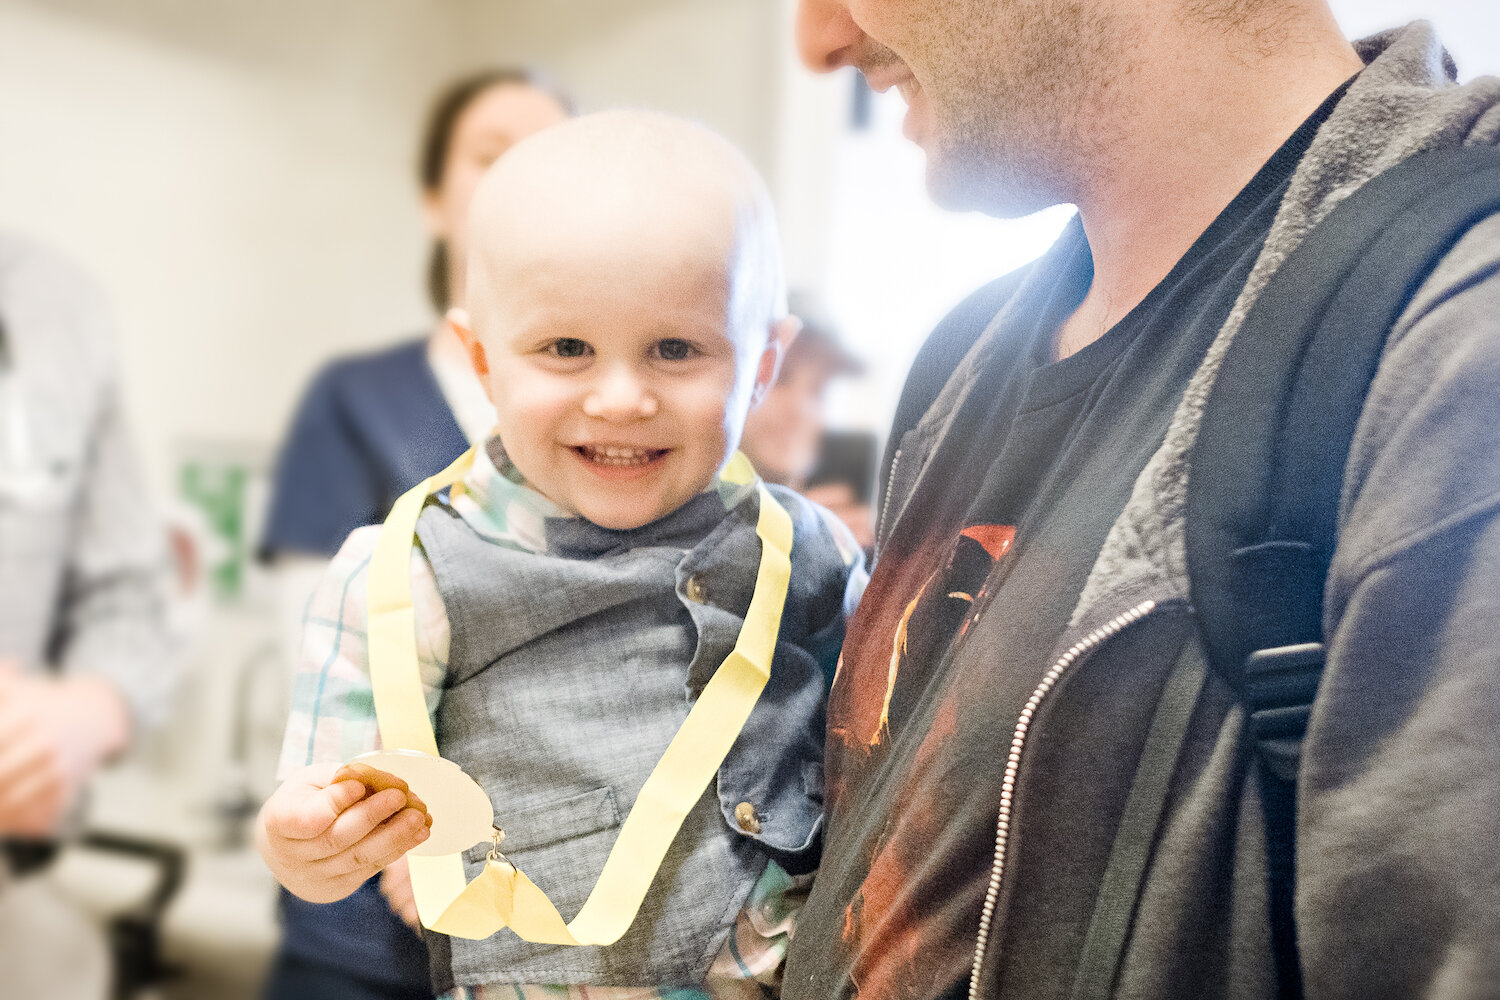 father-holds-young-son-as-boy-is-honored-for-completing-cancer-treament.jpg